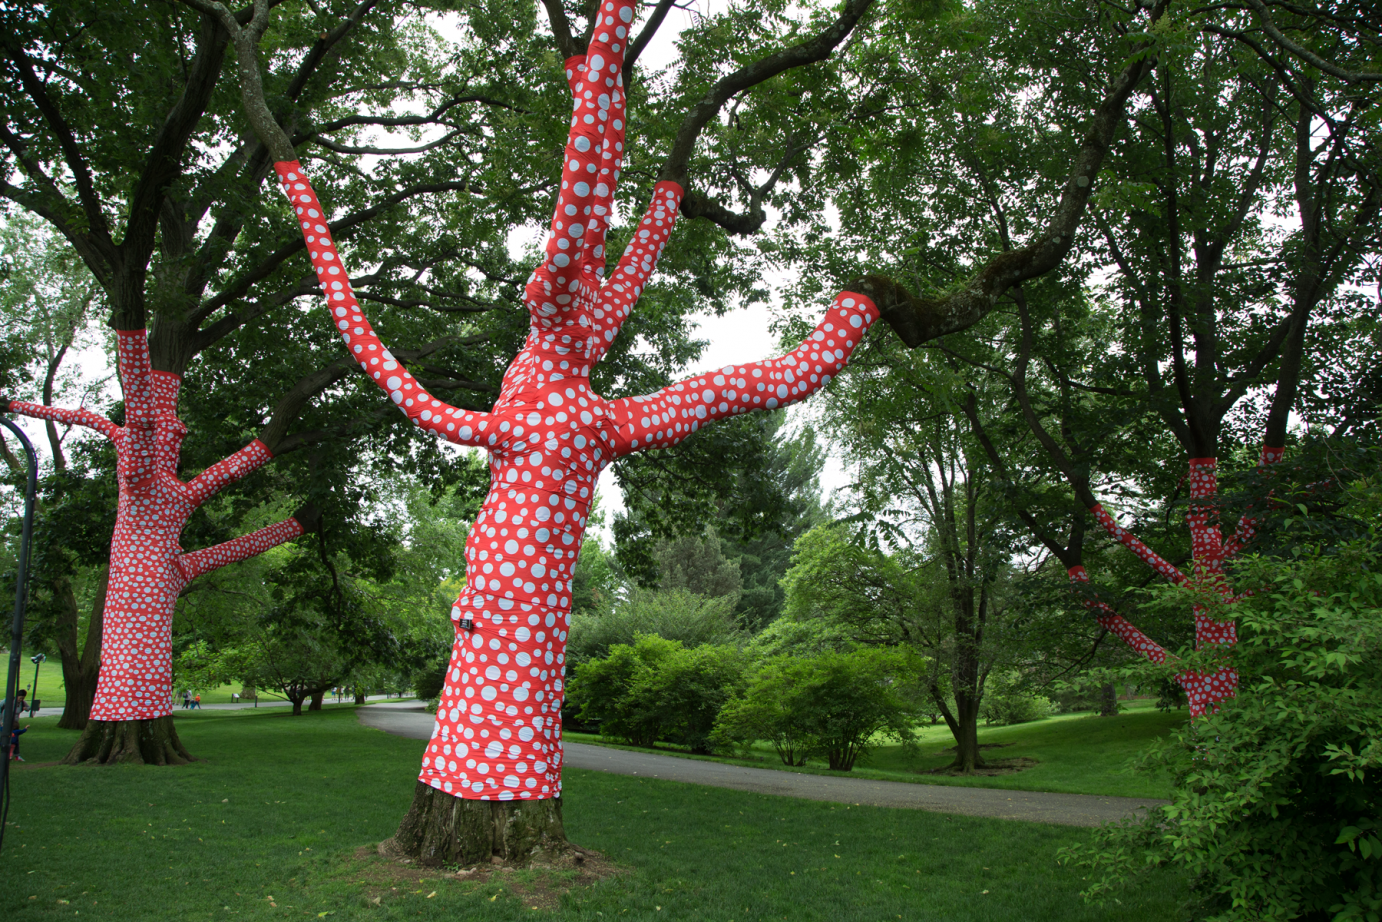 a group of trees with branches and trunks decorated in red with white polka dots at the Brooklyn Botanical Gardens